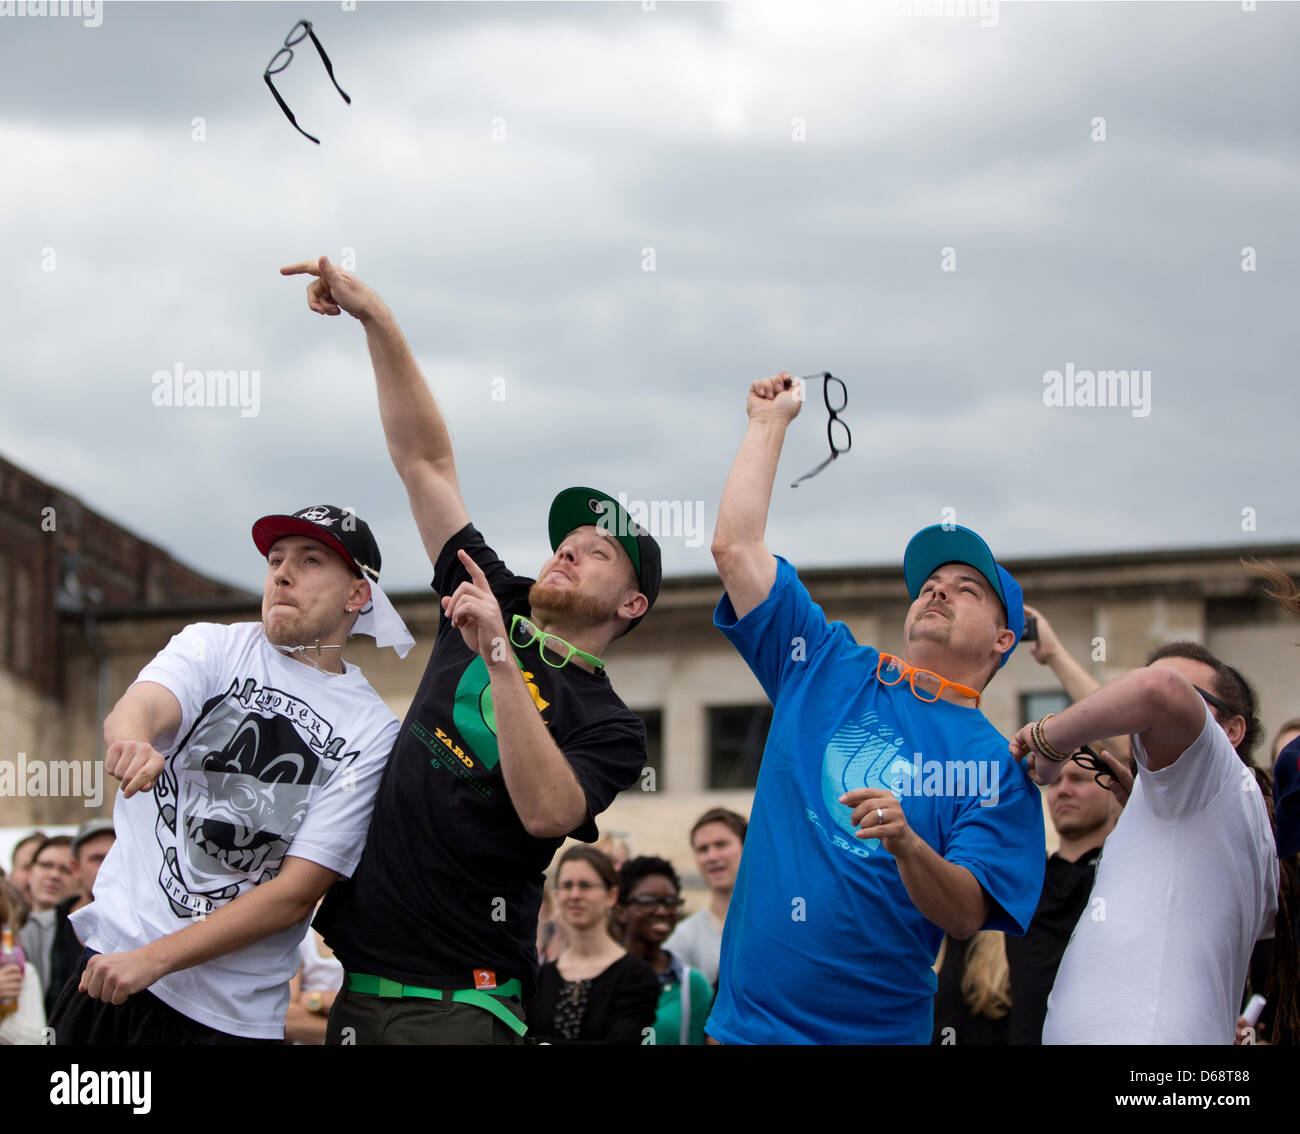 Participants compete in the 'horn-rimmed glasses throwing' event at the Hipster Olympics in Berlin, Germany, 21 July 2012. The Hipster Olympics are not to be taken too seriously  and take place for the secons time. Photo: JOERG CARSTENSEN Stock Photo